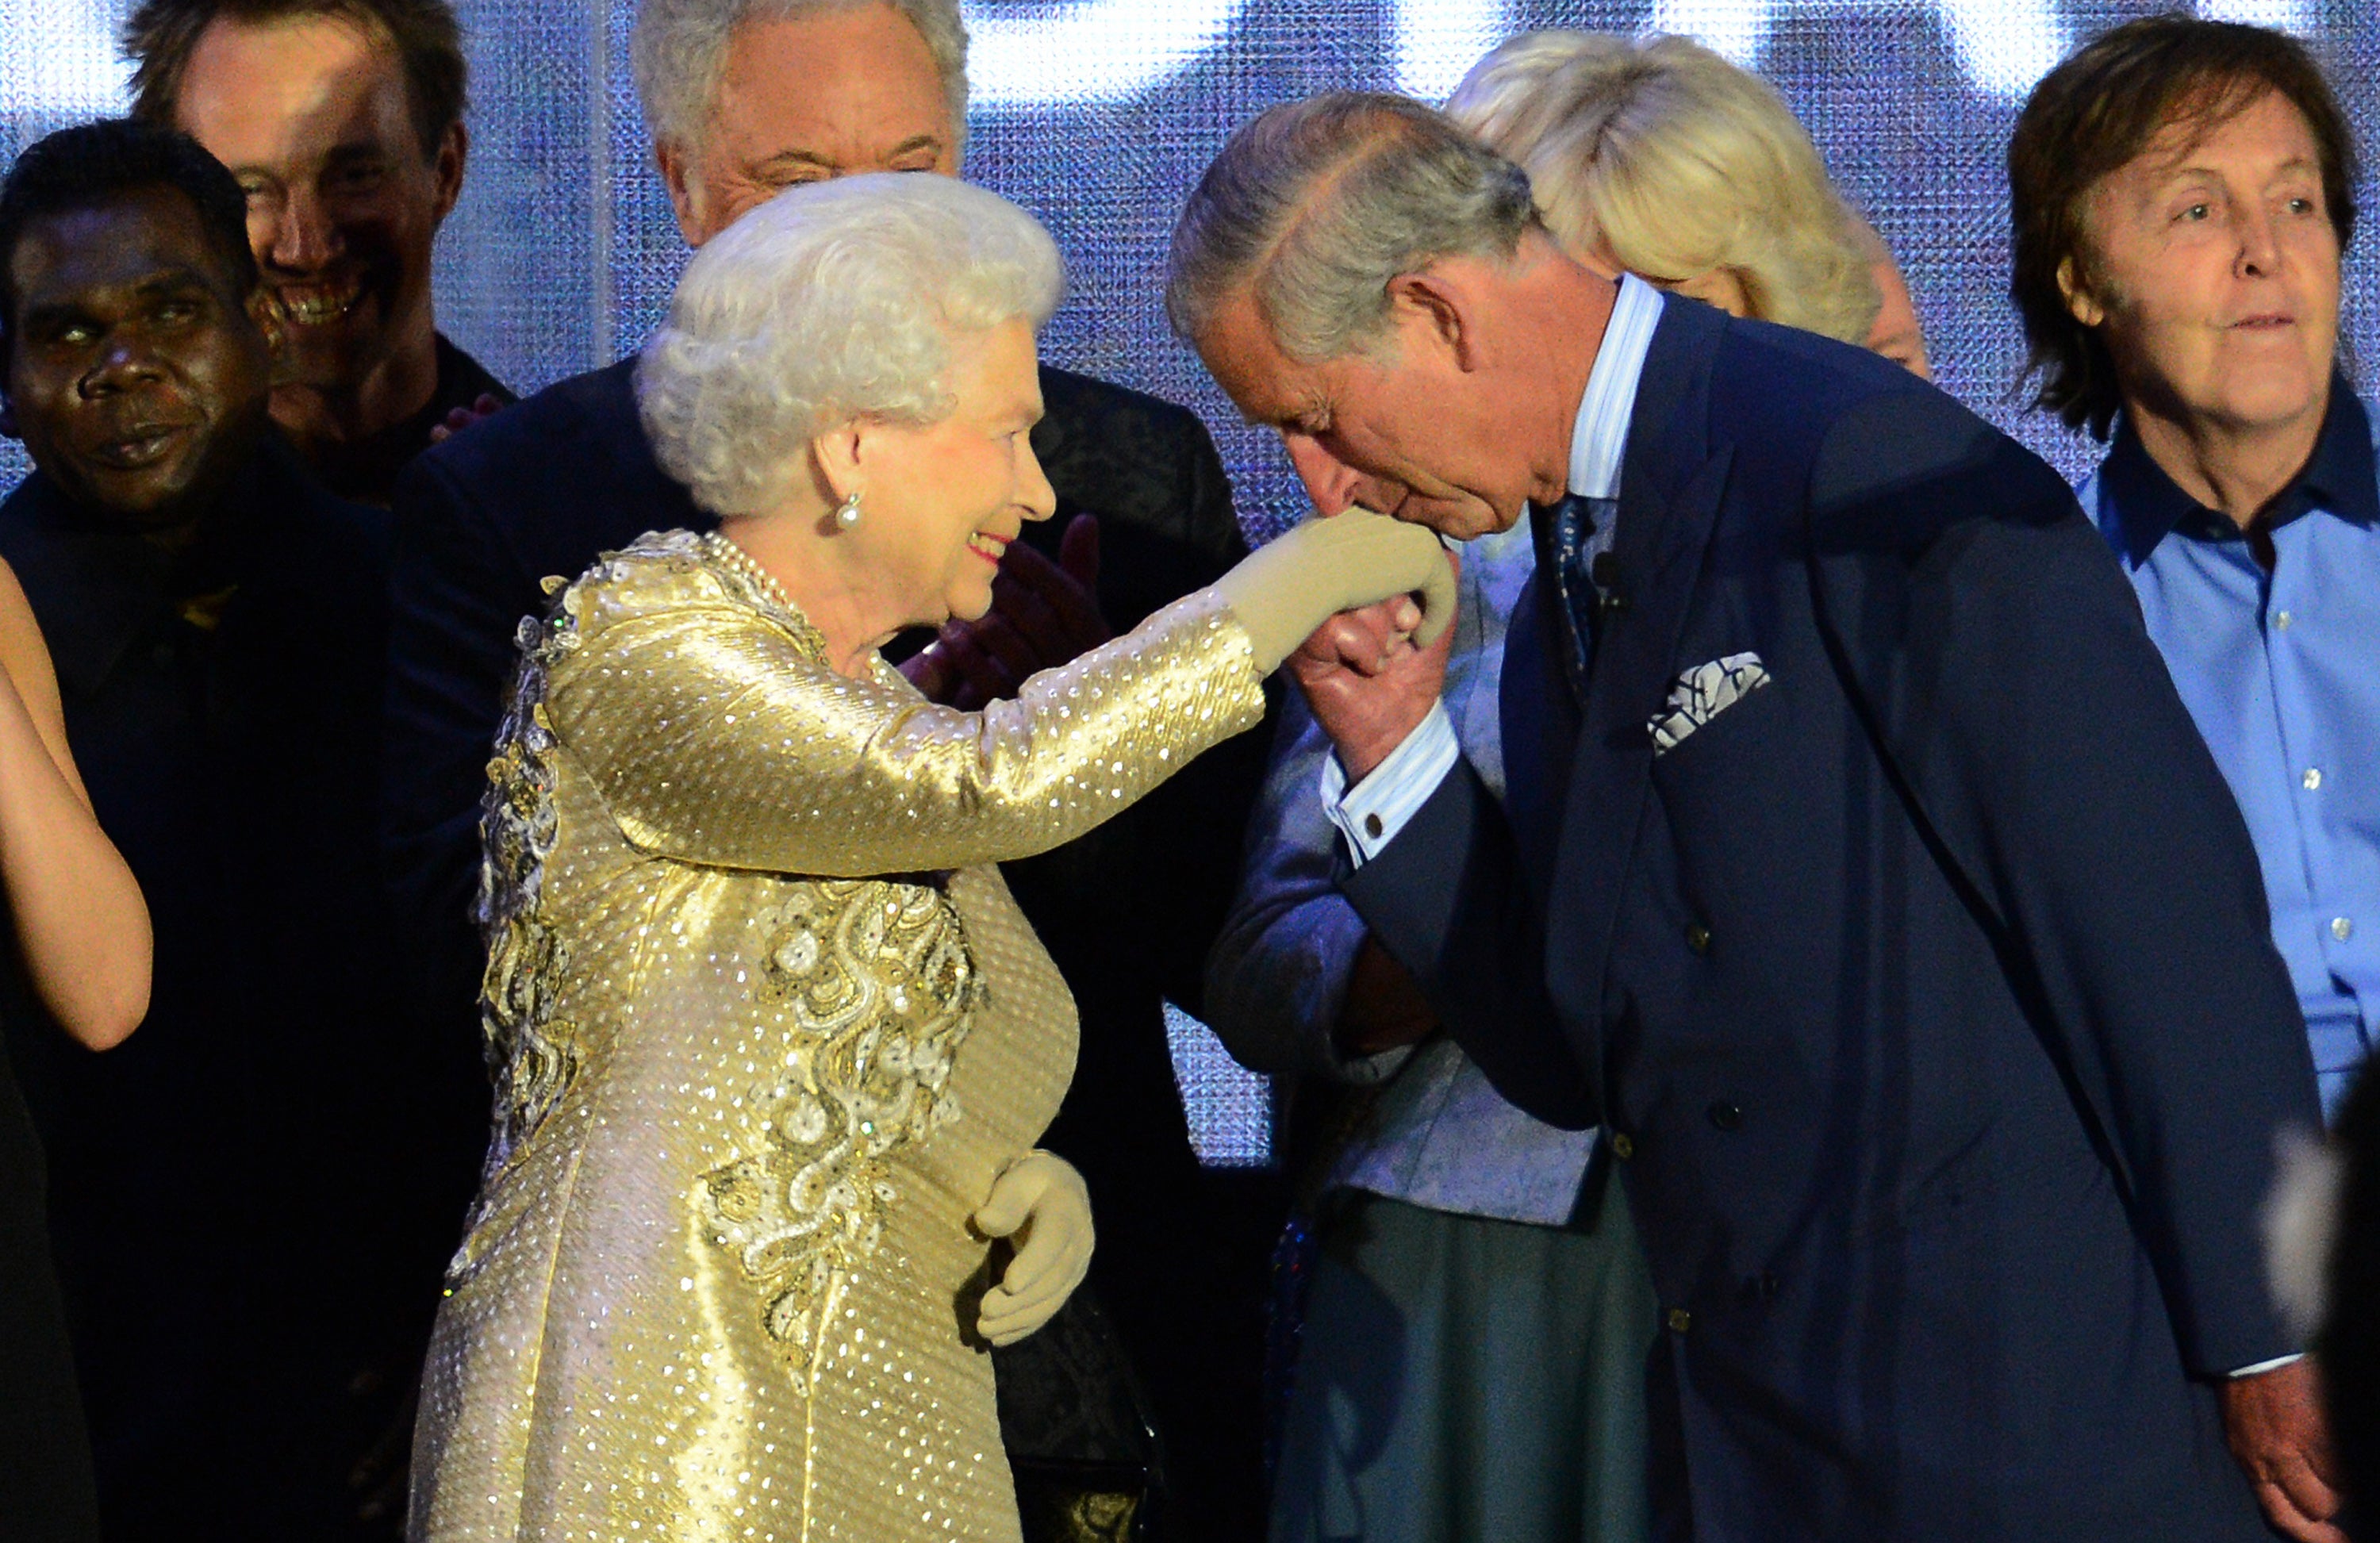 Britain's Prince Charles kisses the hand of his mother Queen Elizabeth at the end of her Diamond Jubilee concert in front of Buckingham Palace in London, 2012